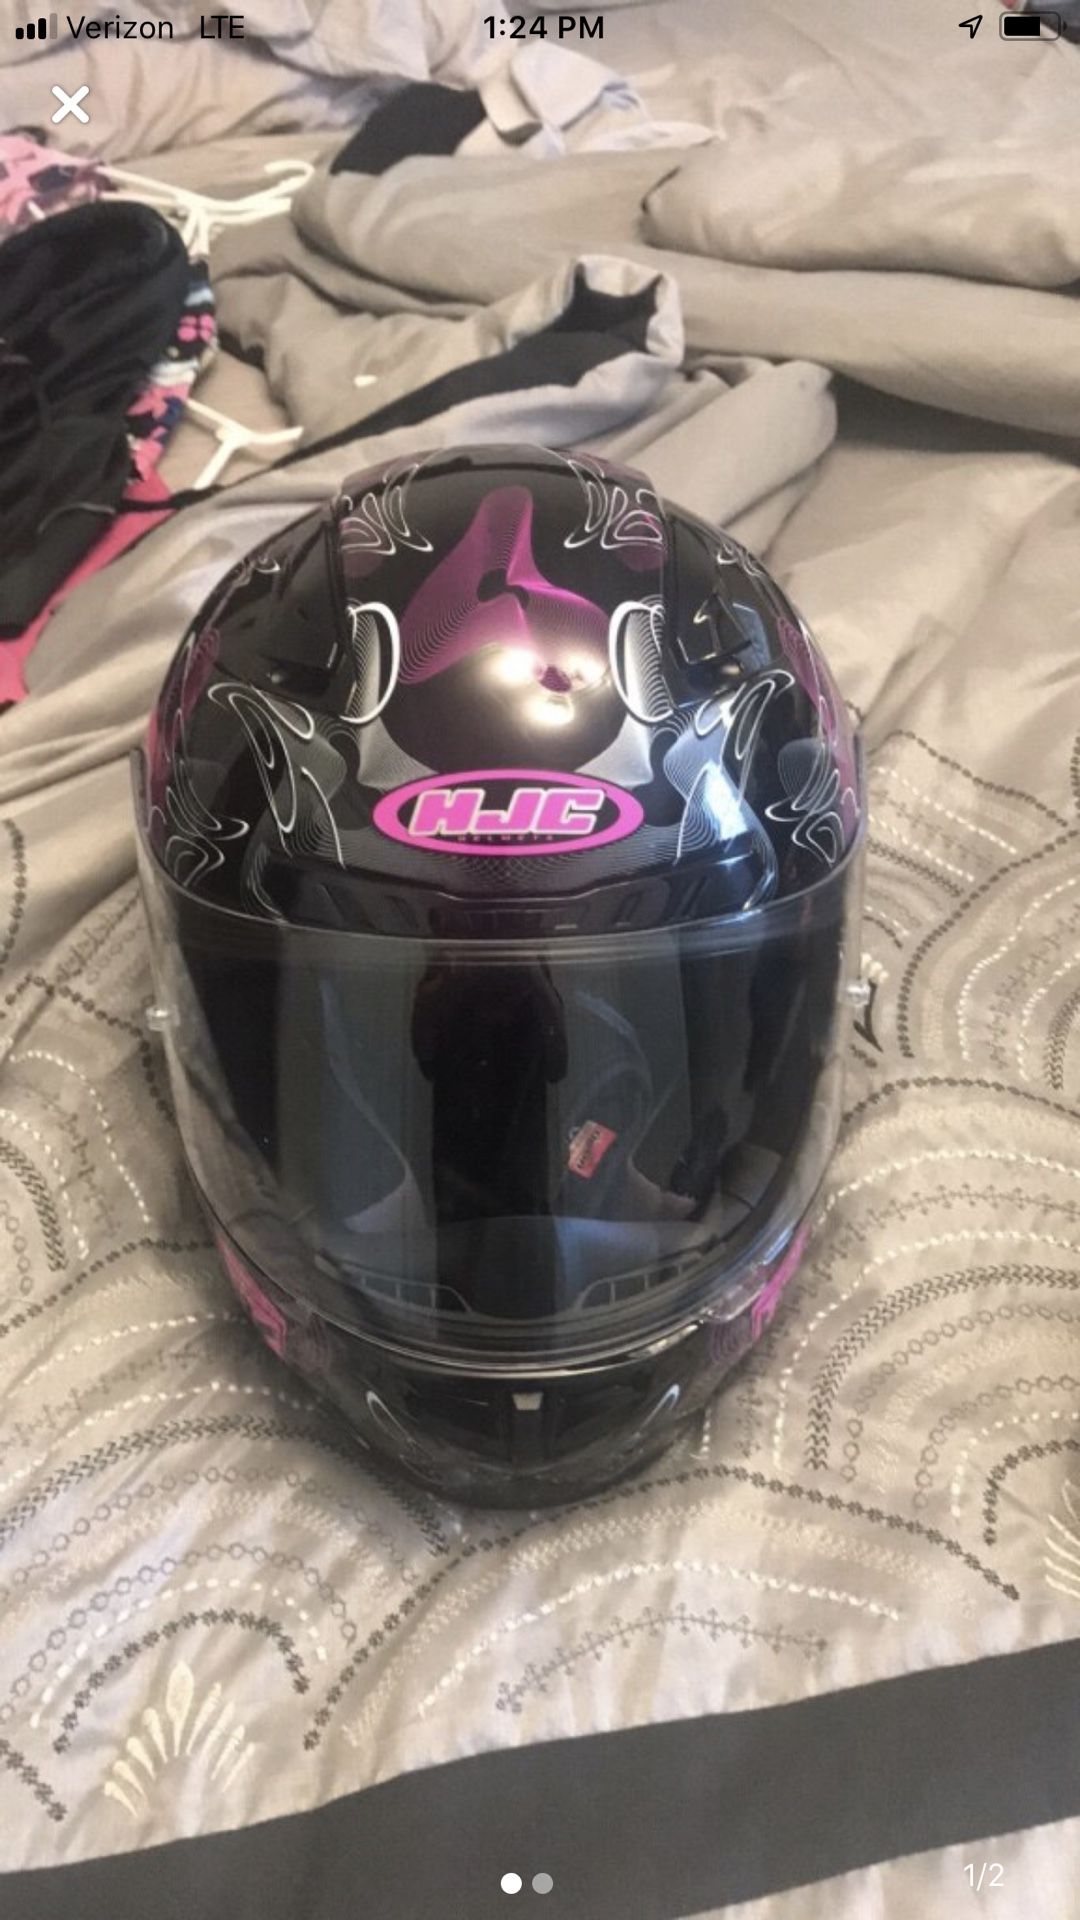 Motorcycle helmet size small